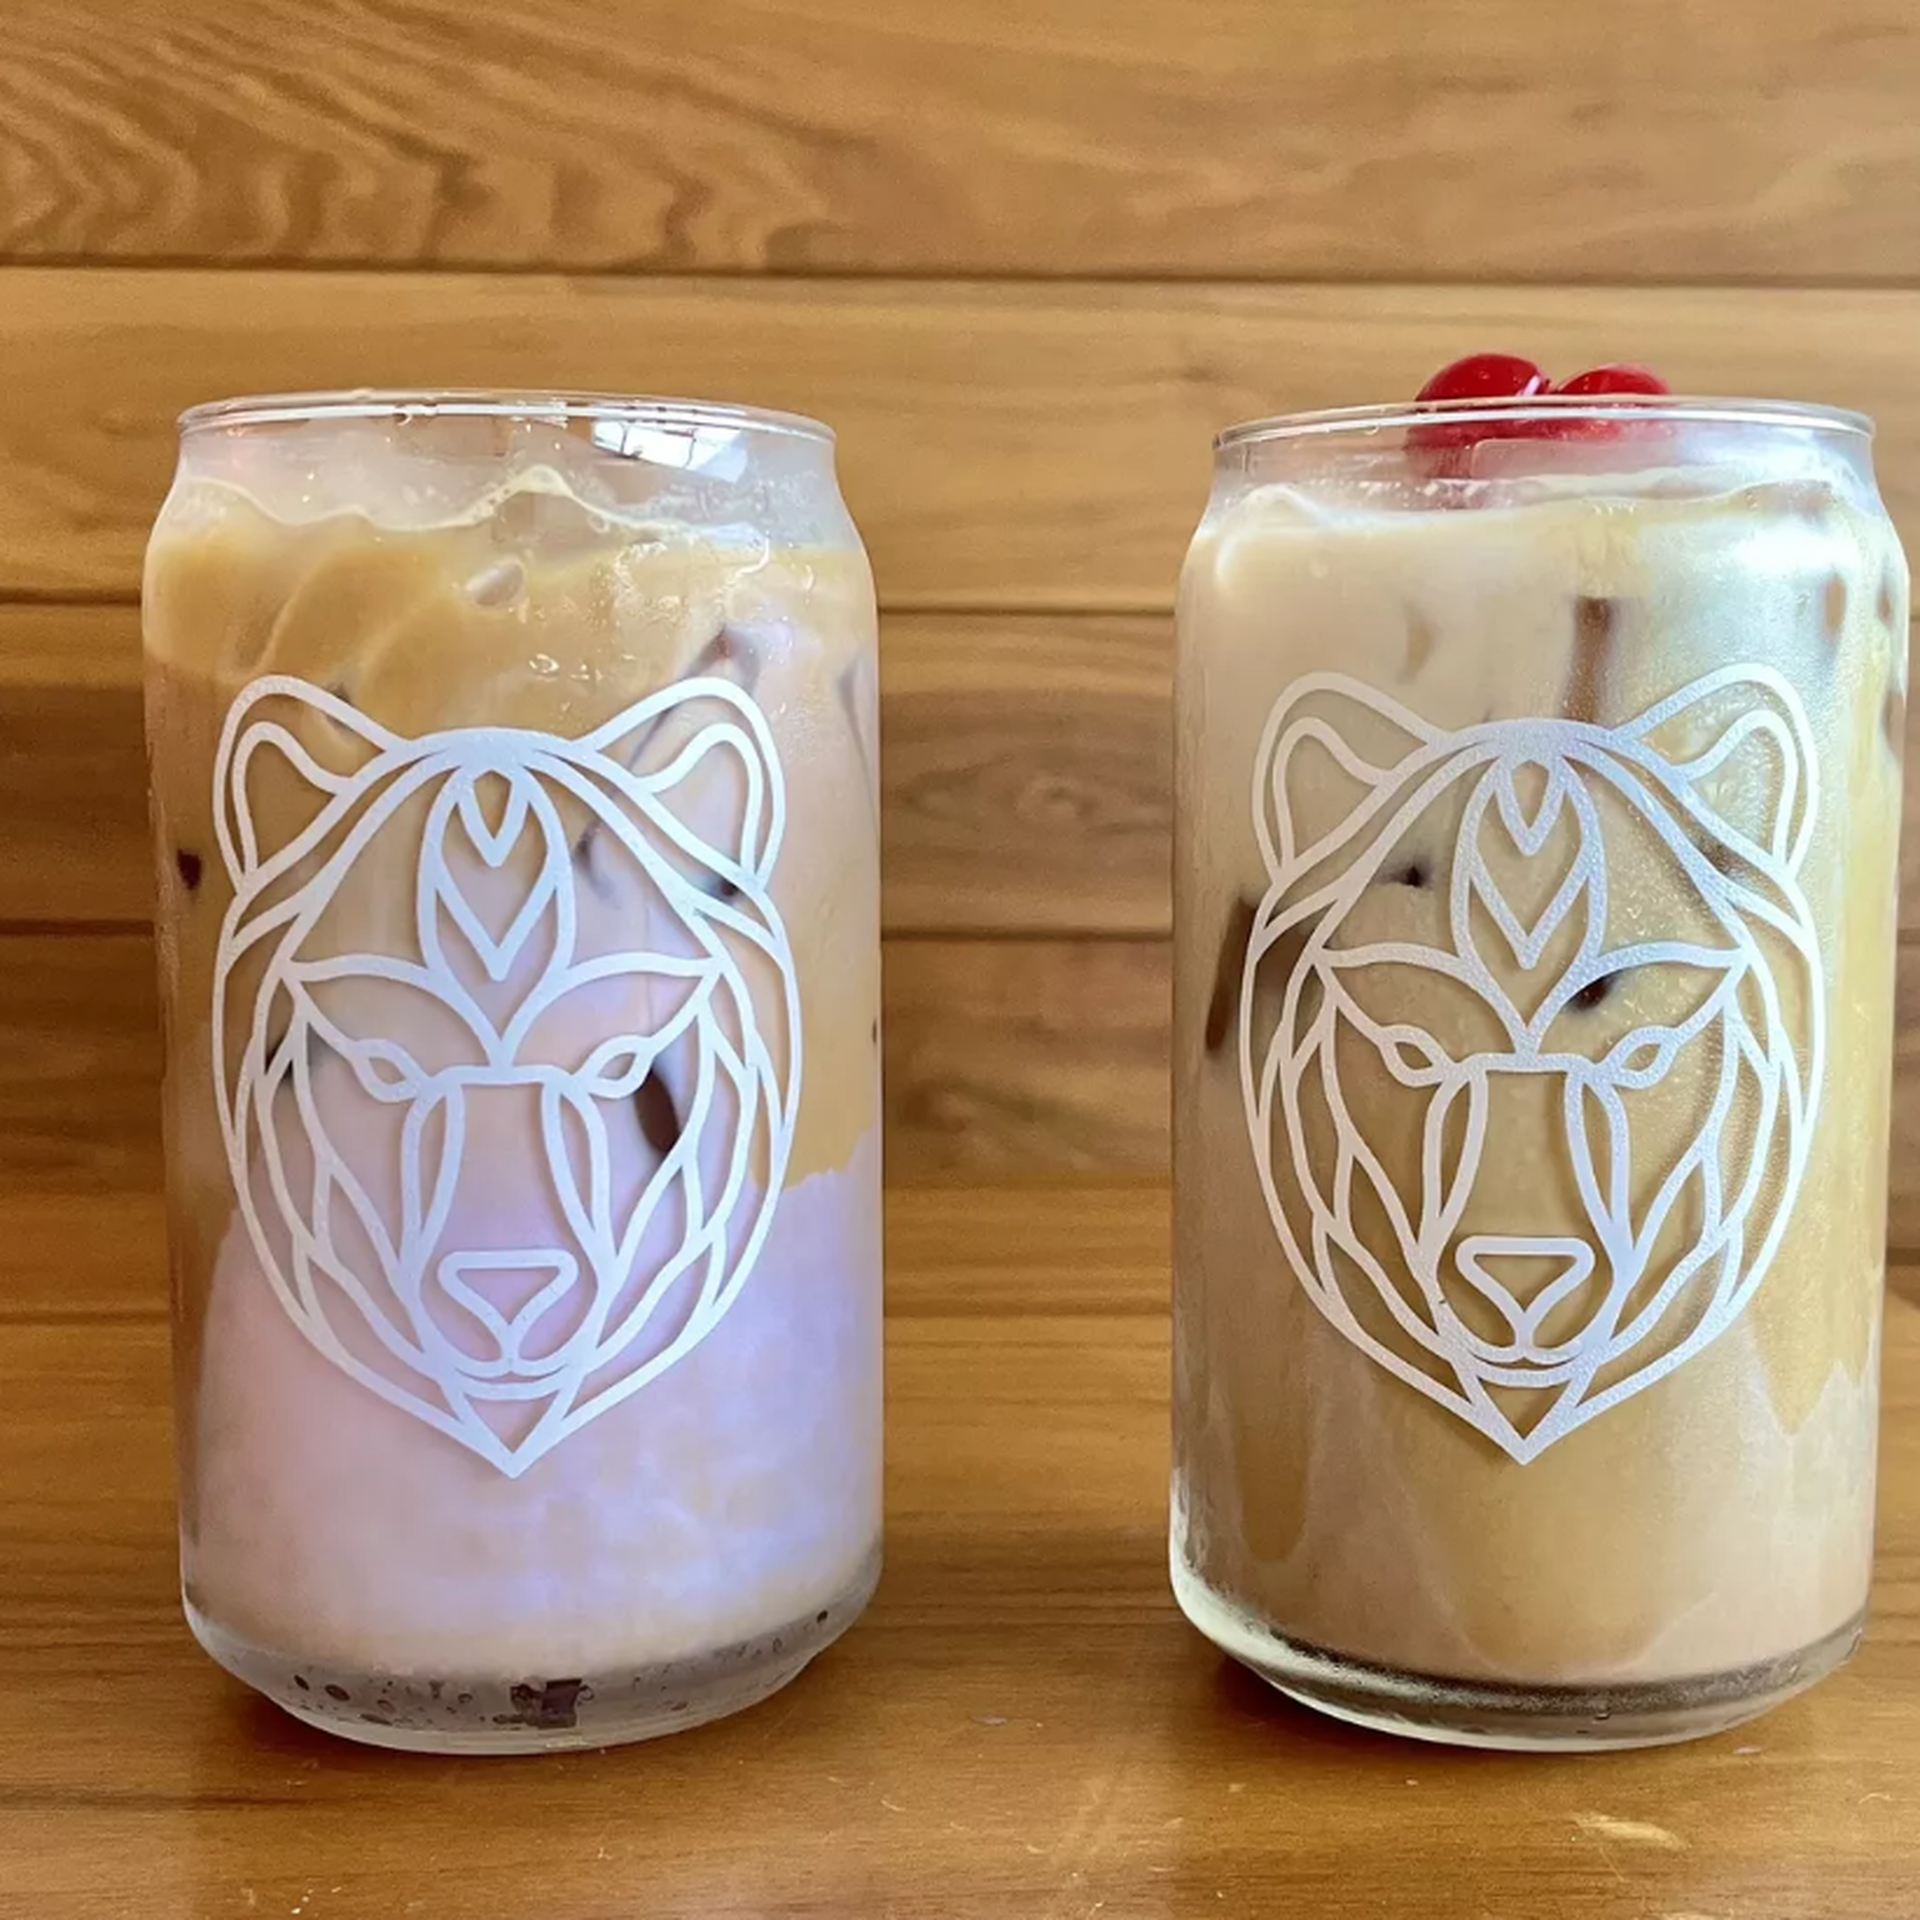 Two iced coffees in can shaped glasses 